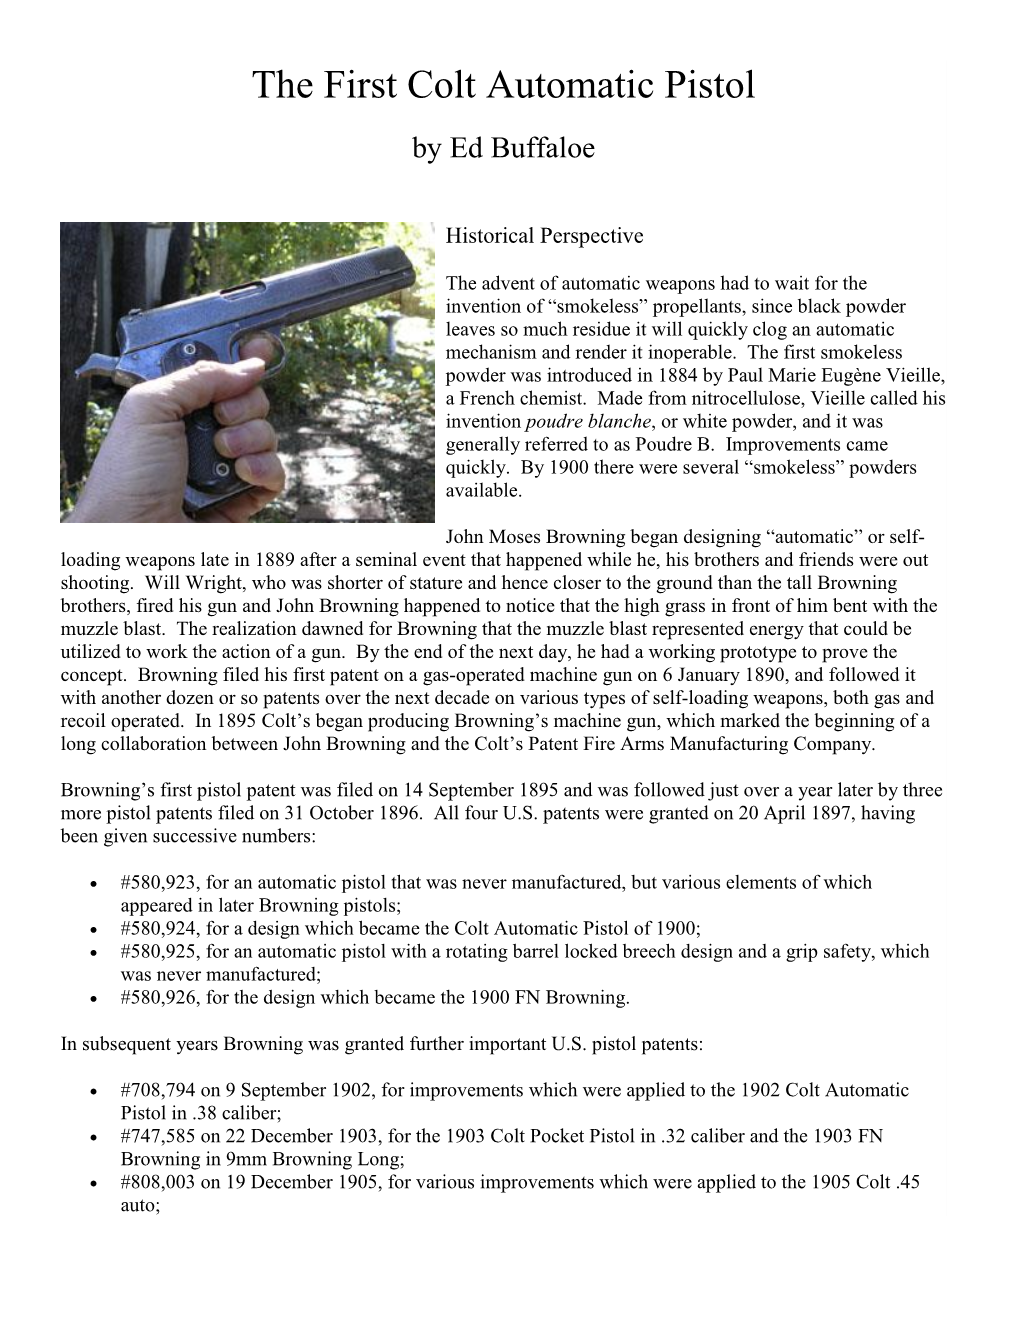 The First Colt Automatic Pistol by Ed Buffaloe